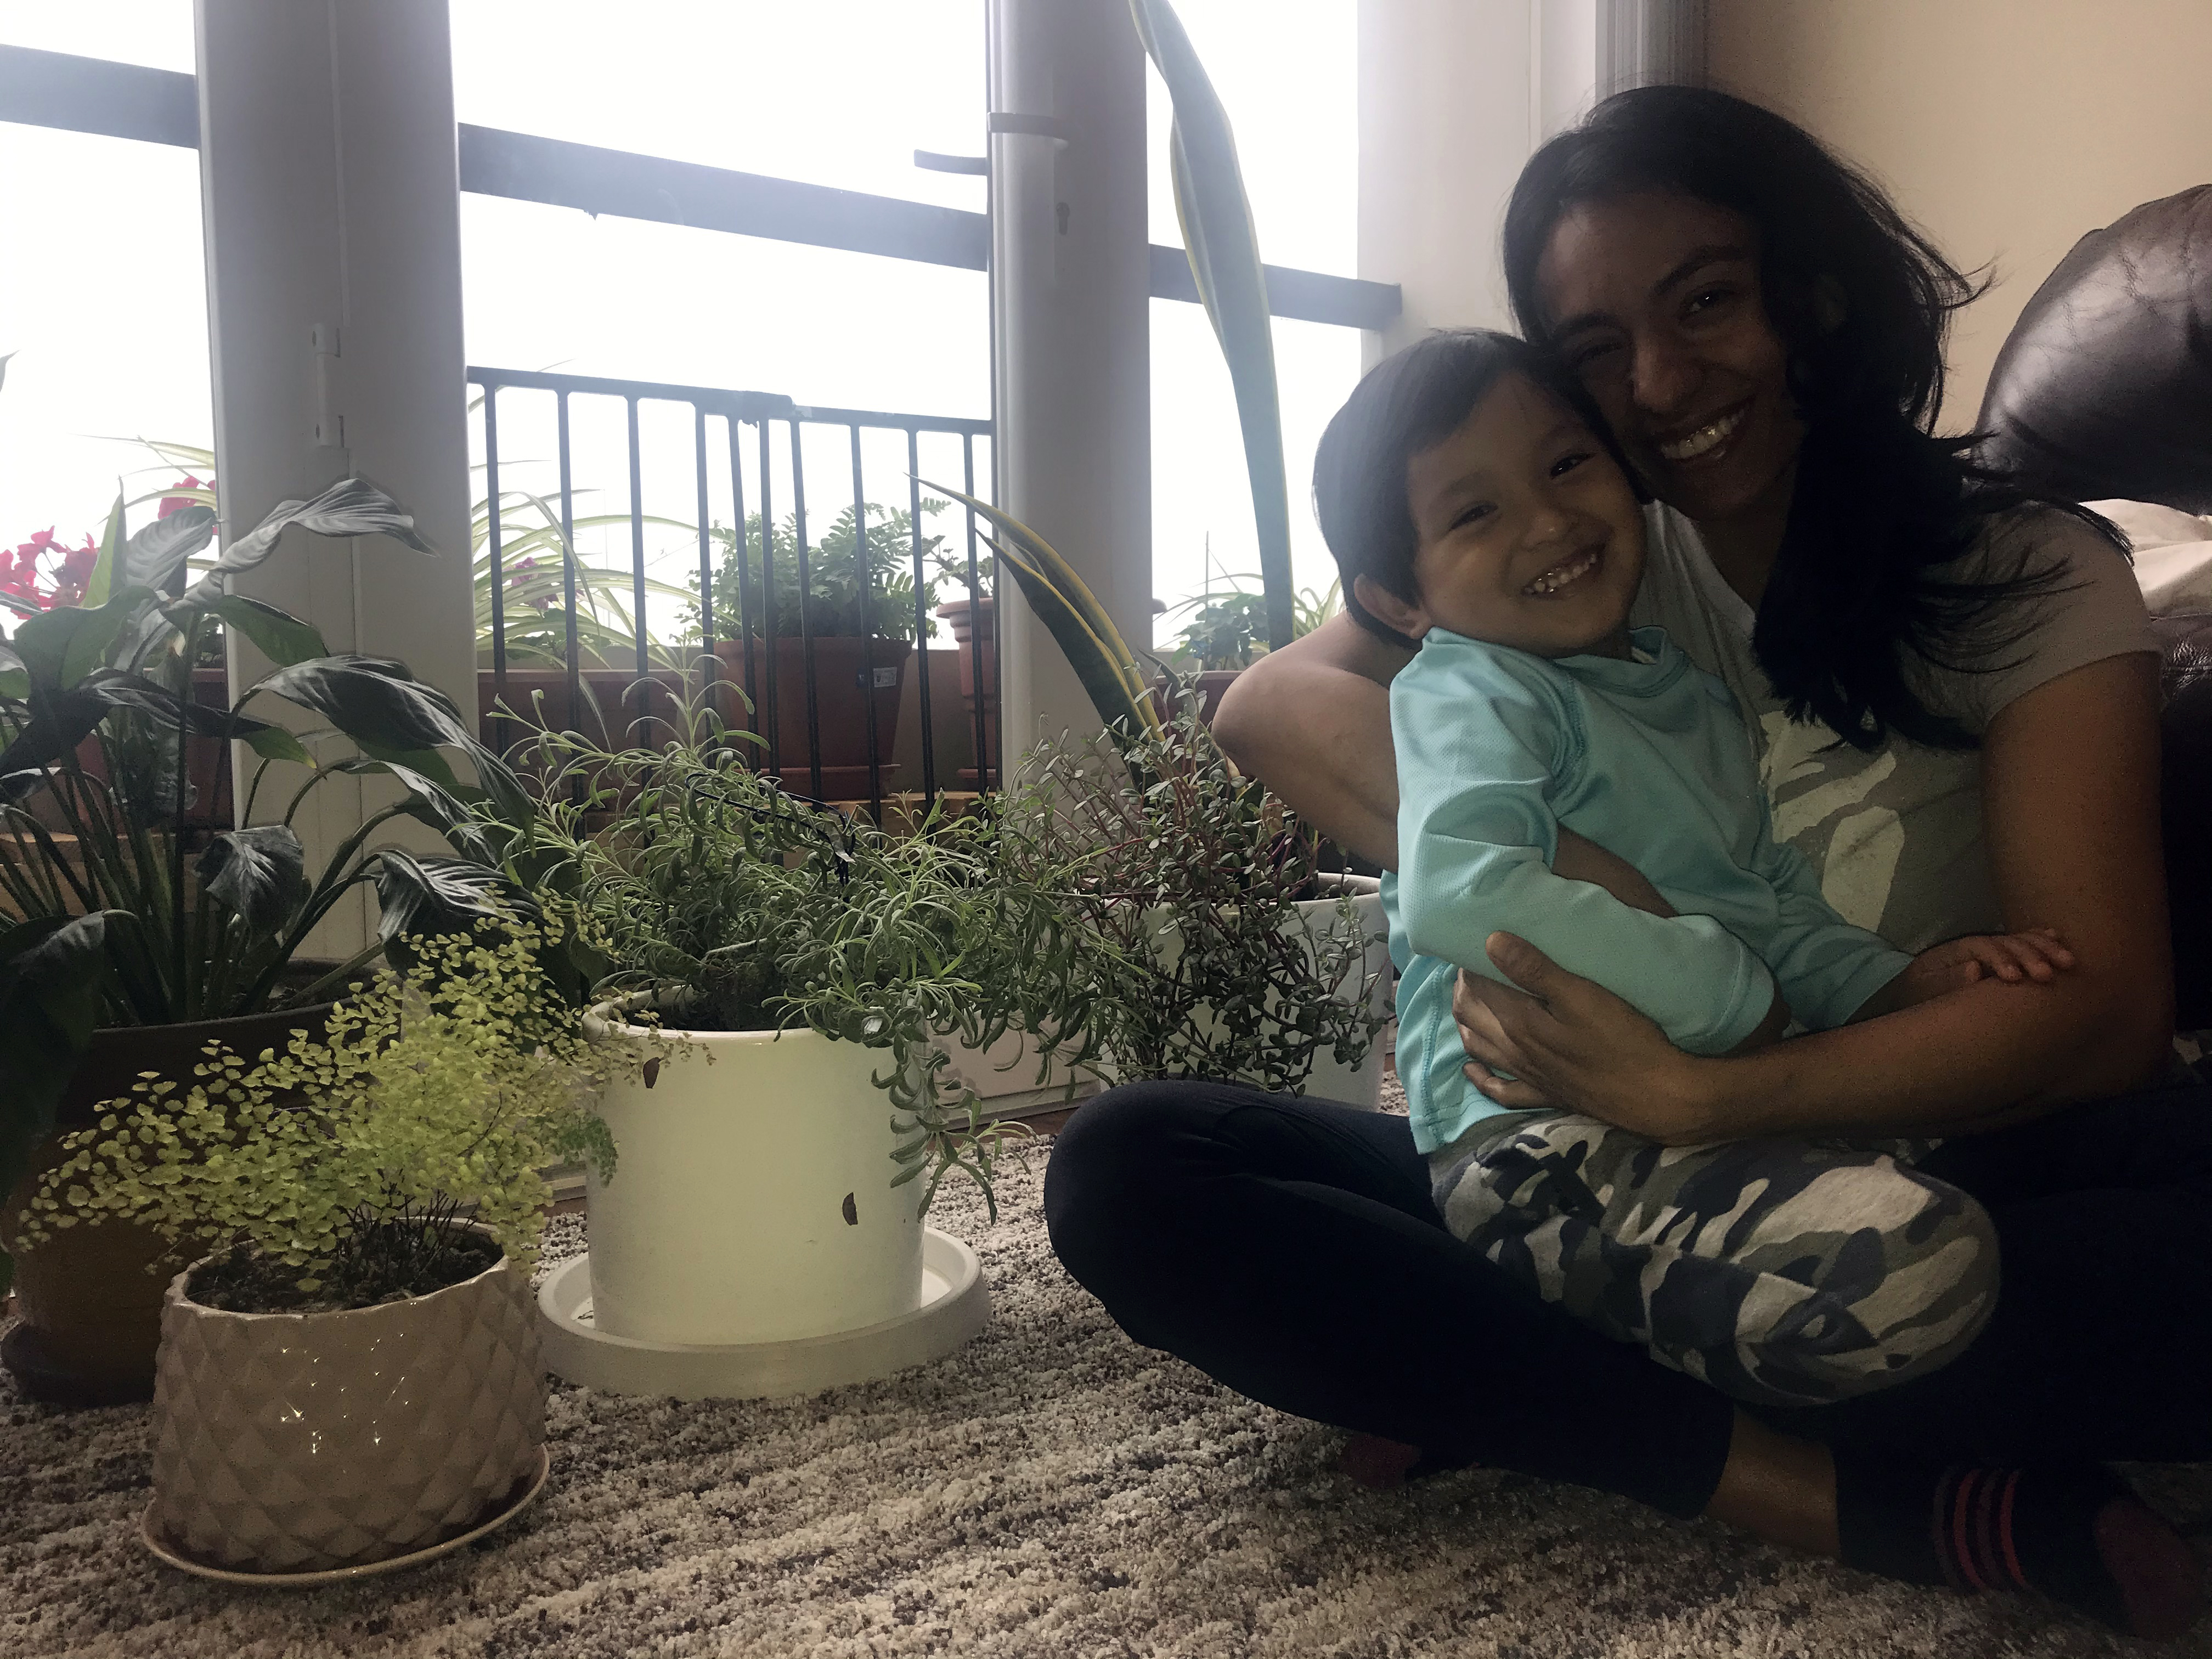 Jenny and Thiago enjoy the peace and calm of their tiny indoor jungle.